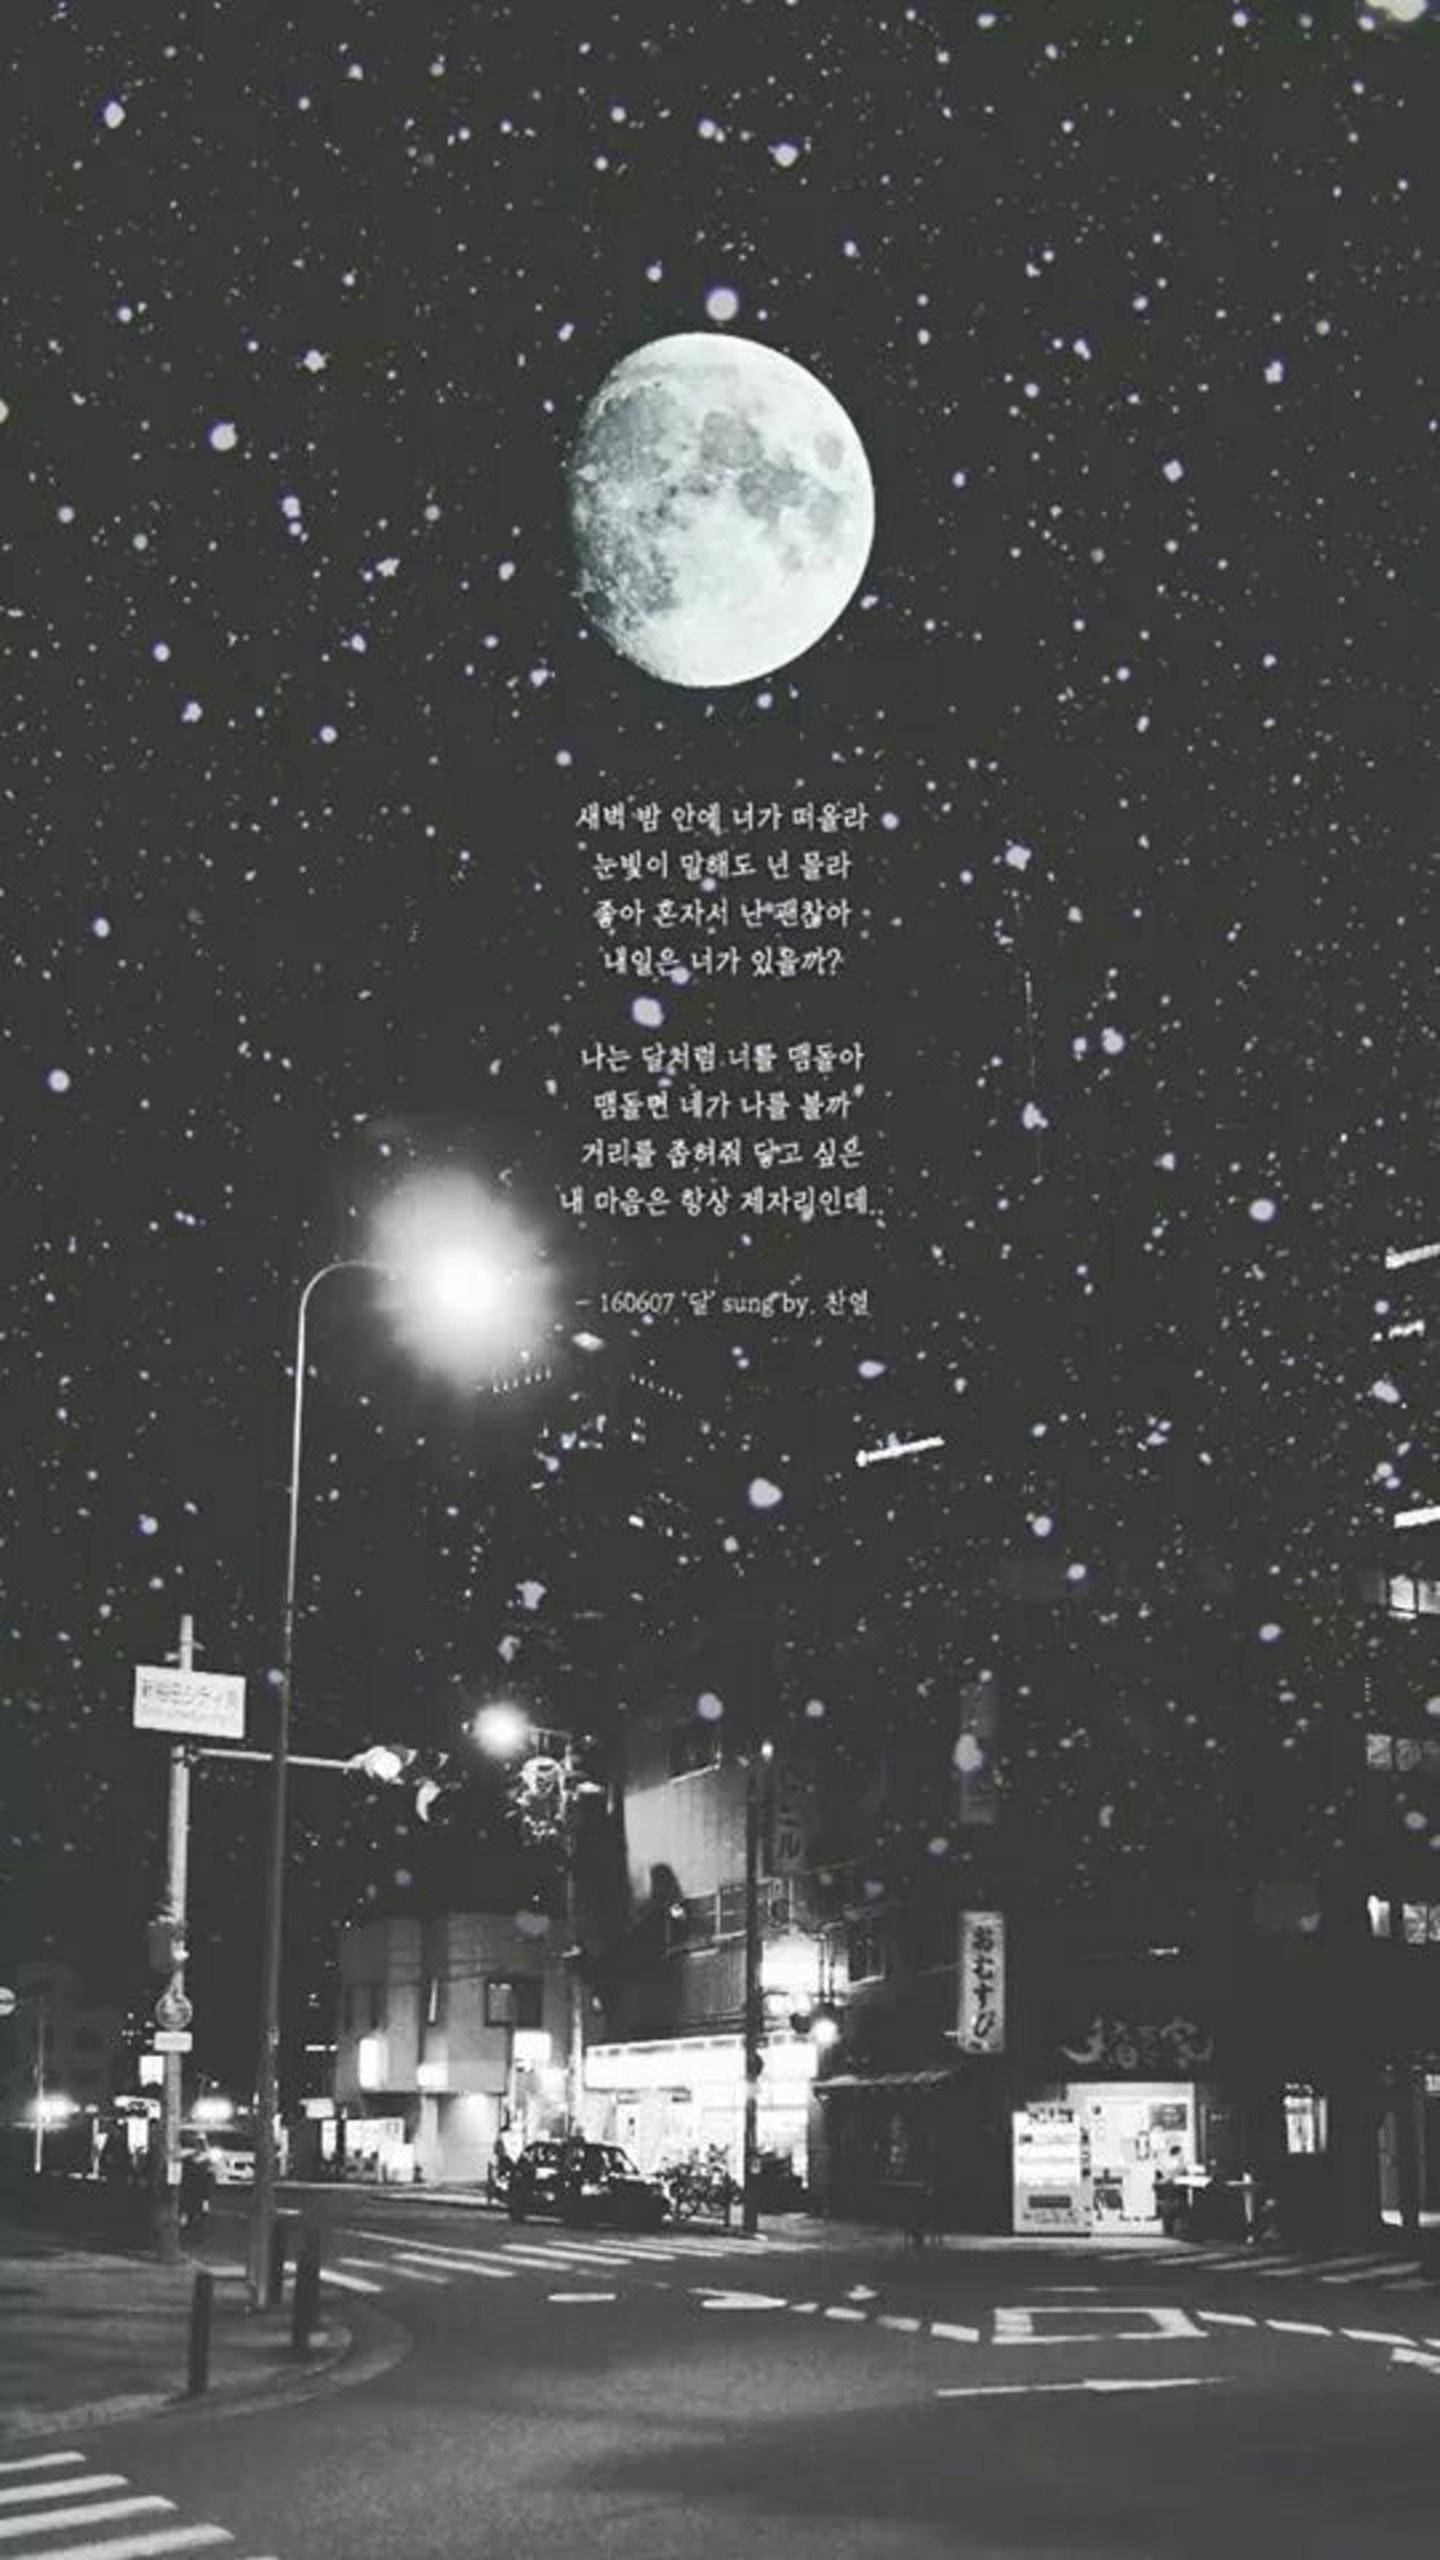 A night scene with the moon and stars in it - Phone, Seoul